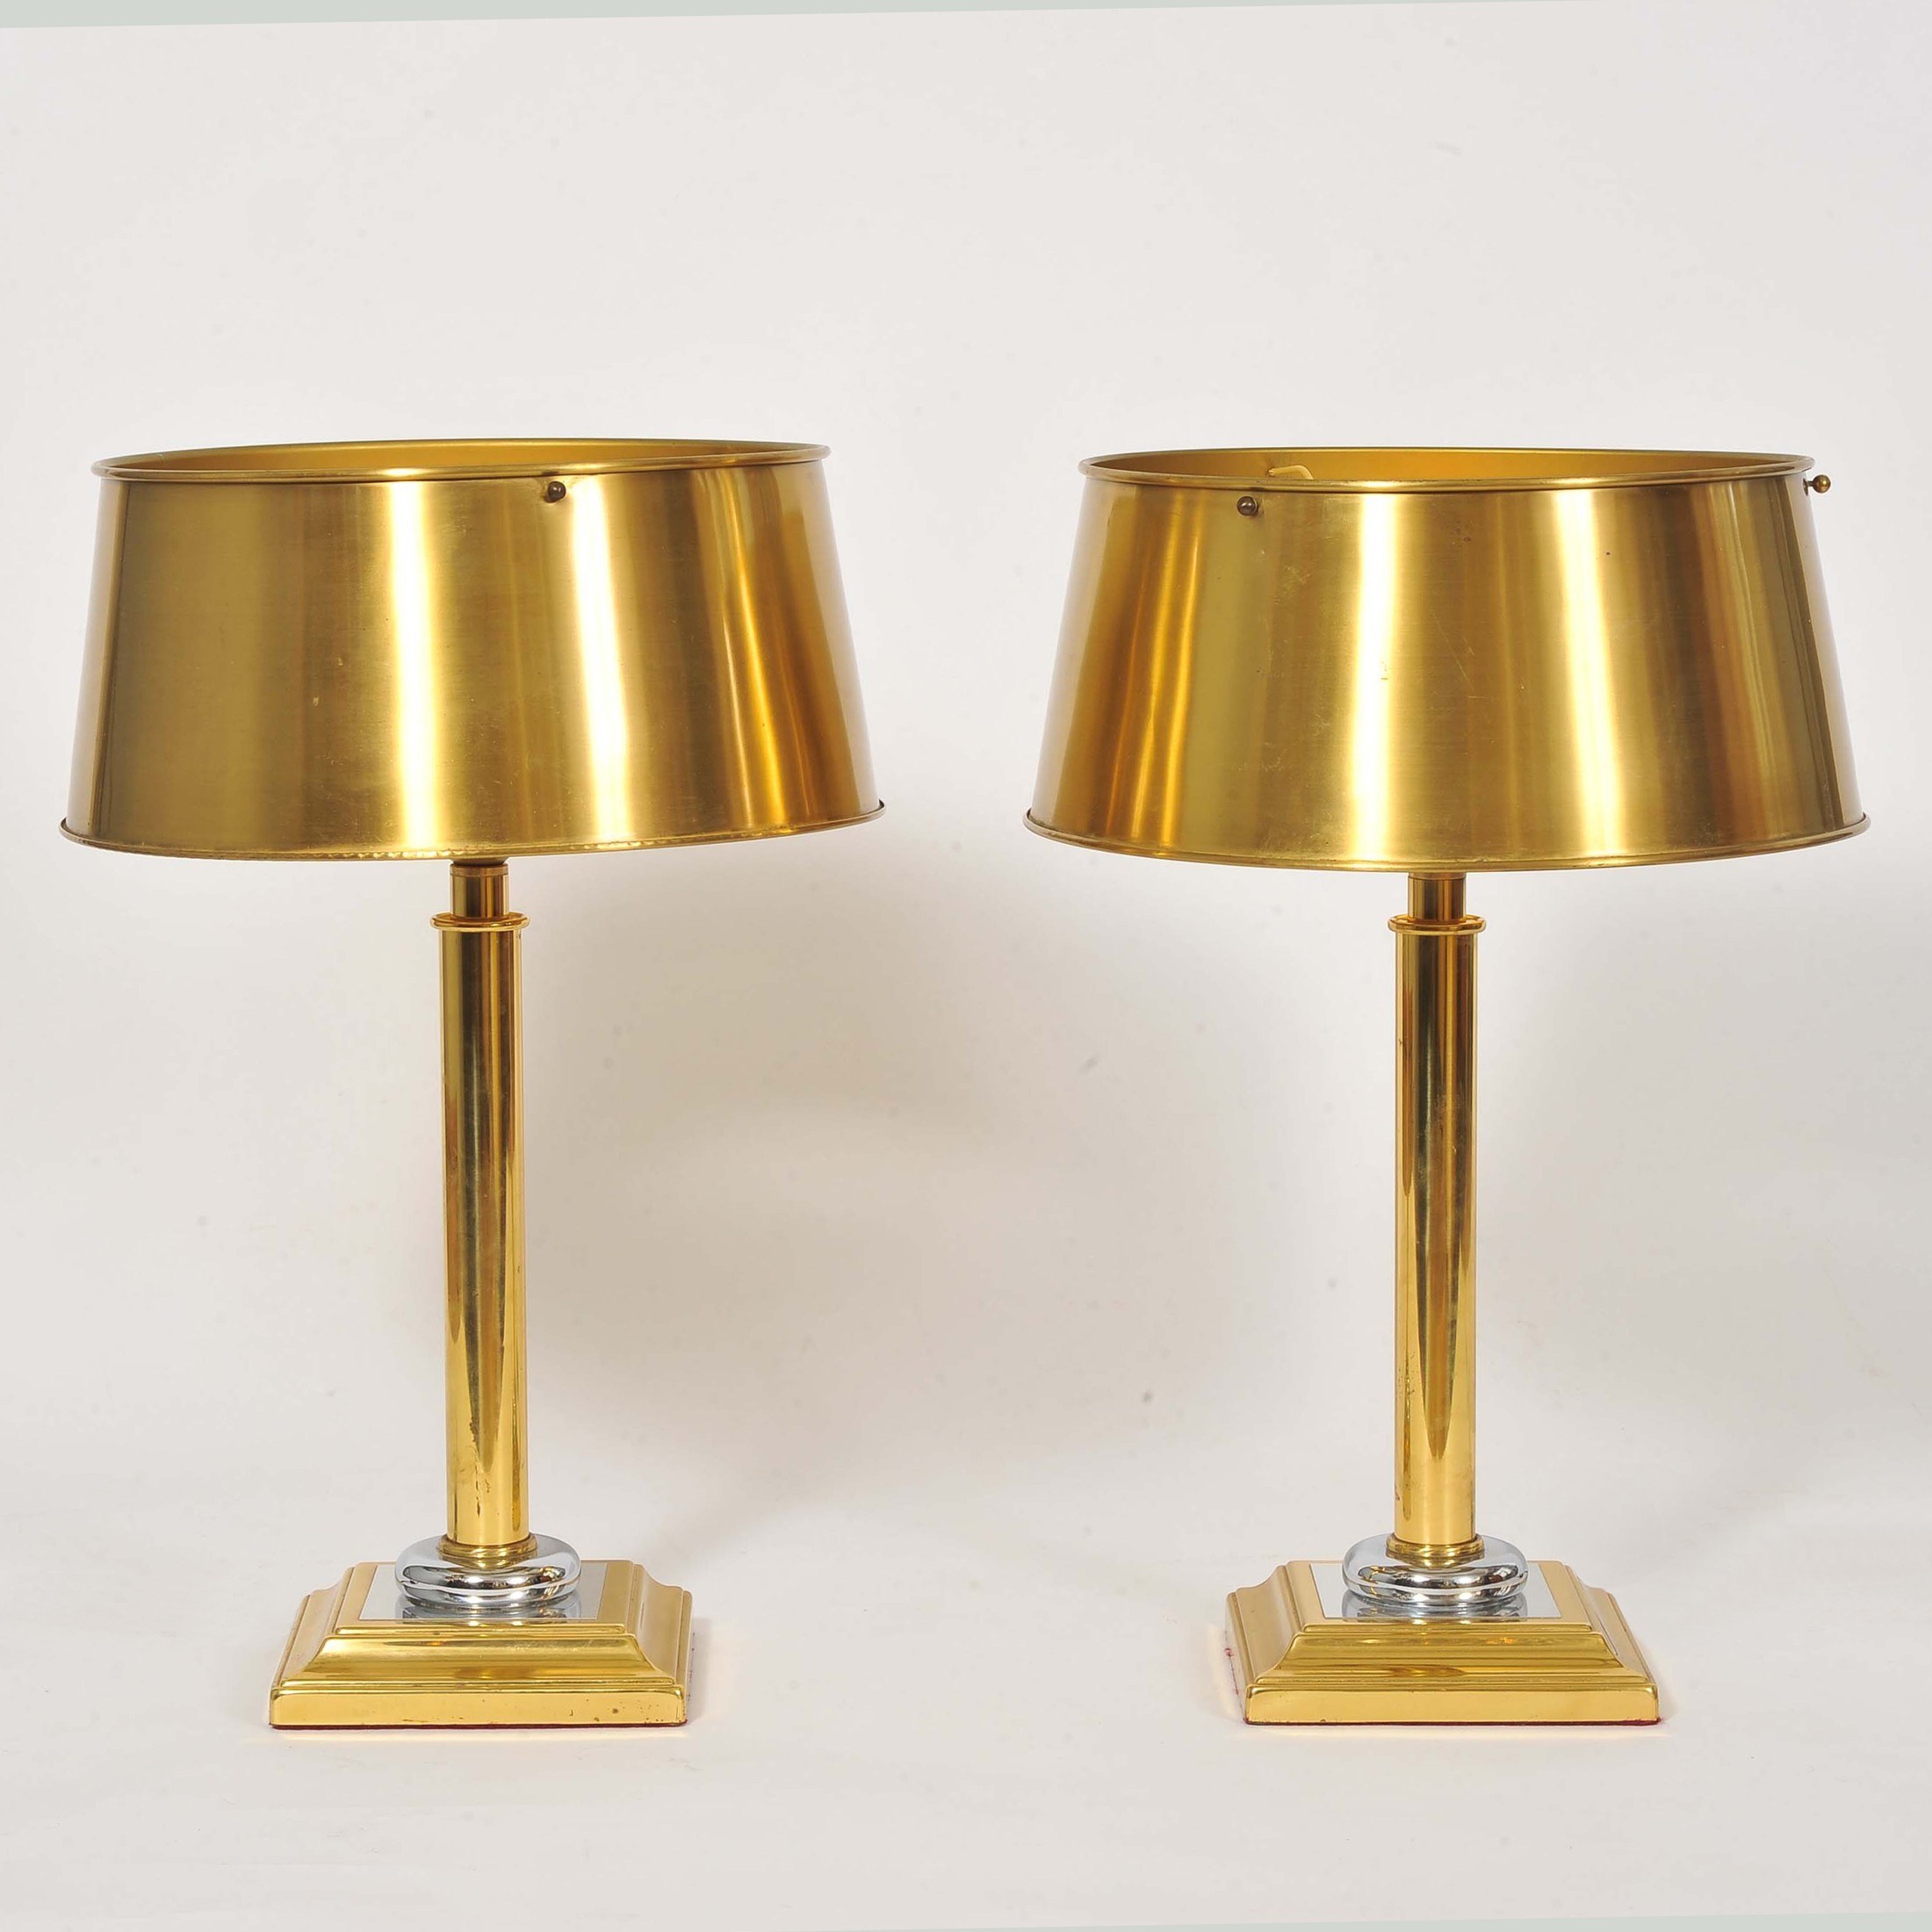 The image for Valerie Wade Lt671 Pair 1950S French Brass Lamps 01